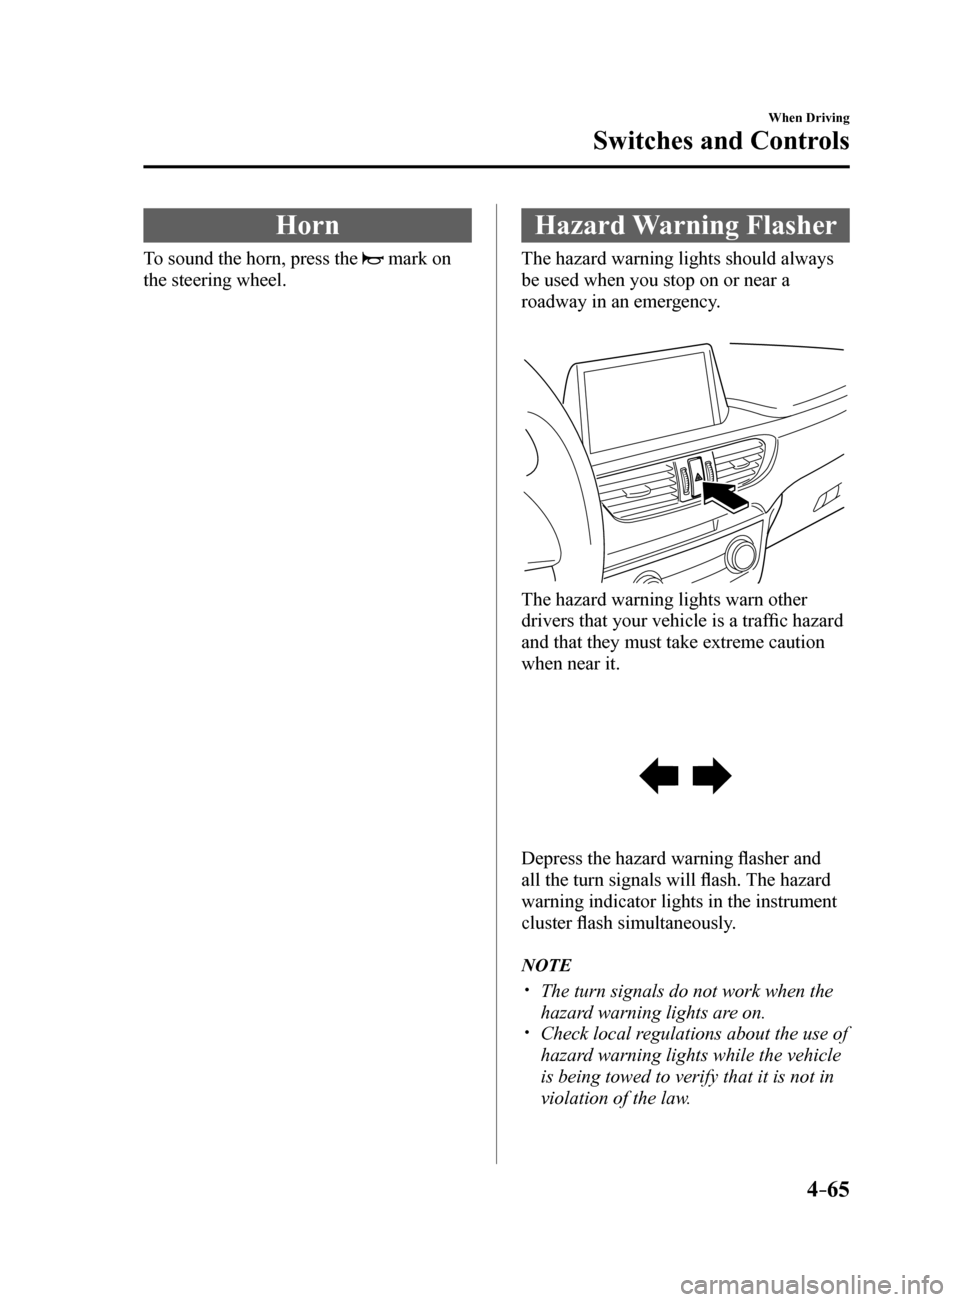 MAZDA MODEL 6 2017  Owners Manual (in English) 4–65
When Driving
Switches and Controls
Horn
To sound the horn, press the  mark on 
the steering wheel.
Hazard Warning Flasher
The hazard warning lights should always 
be used when you stop on or ne